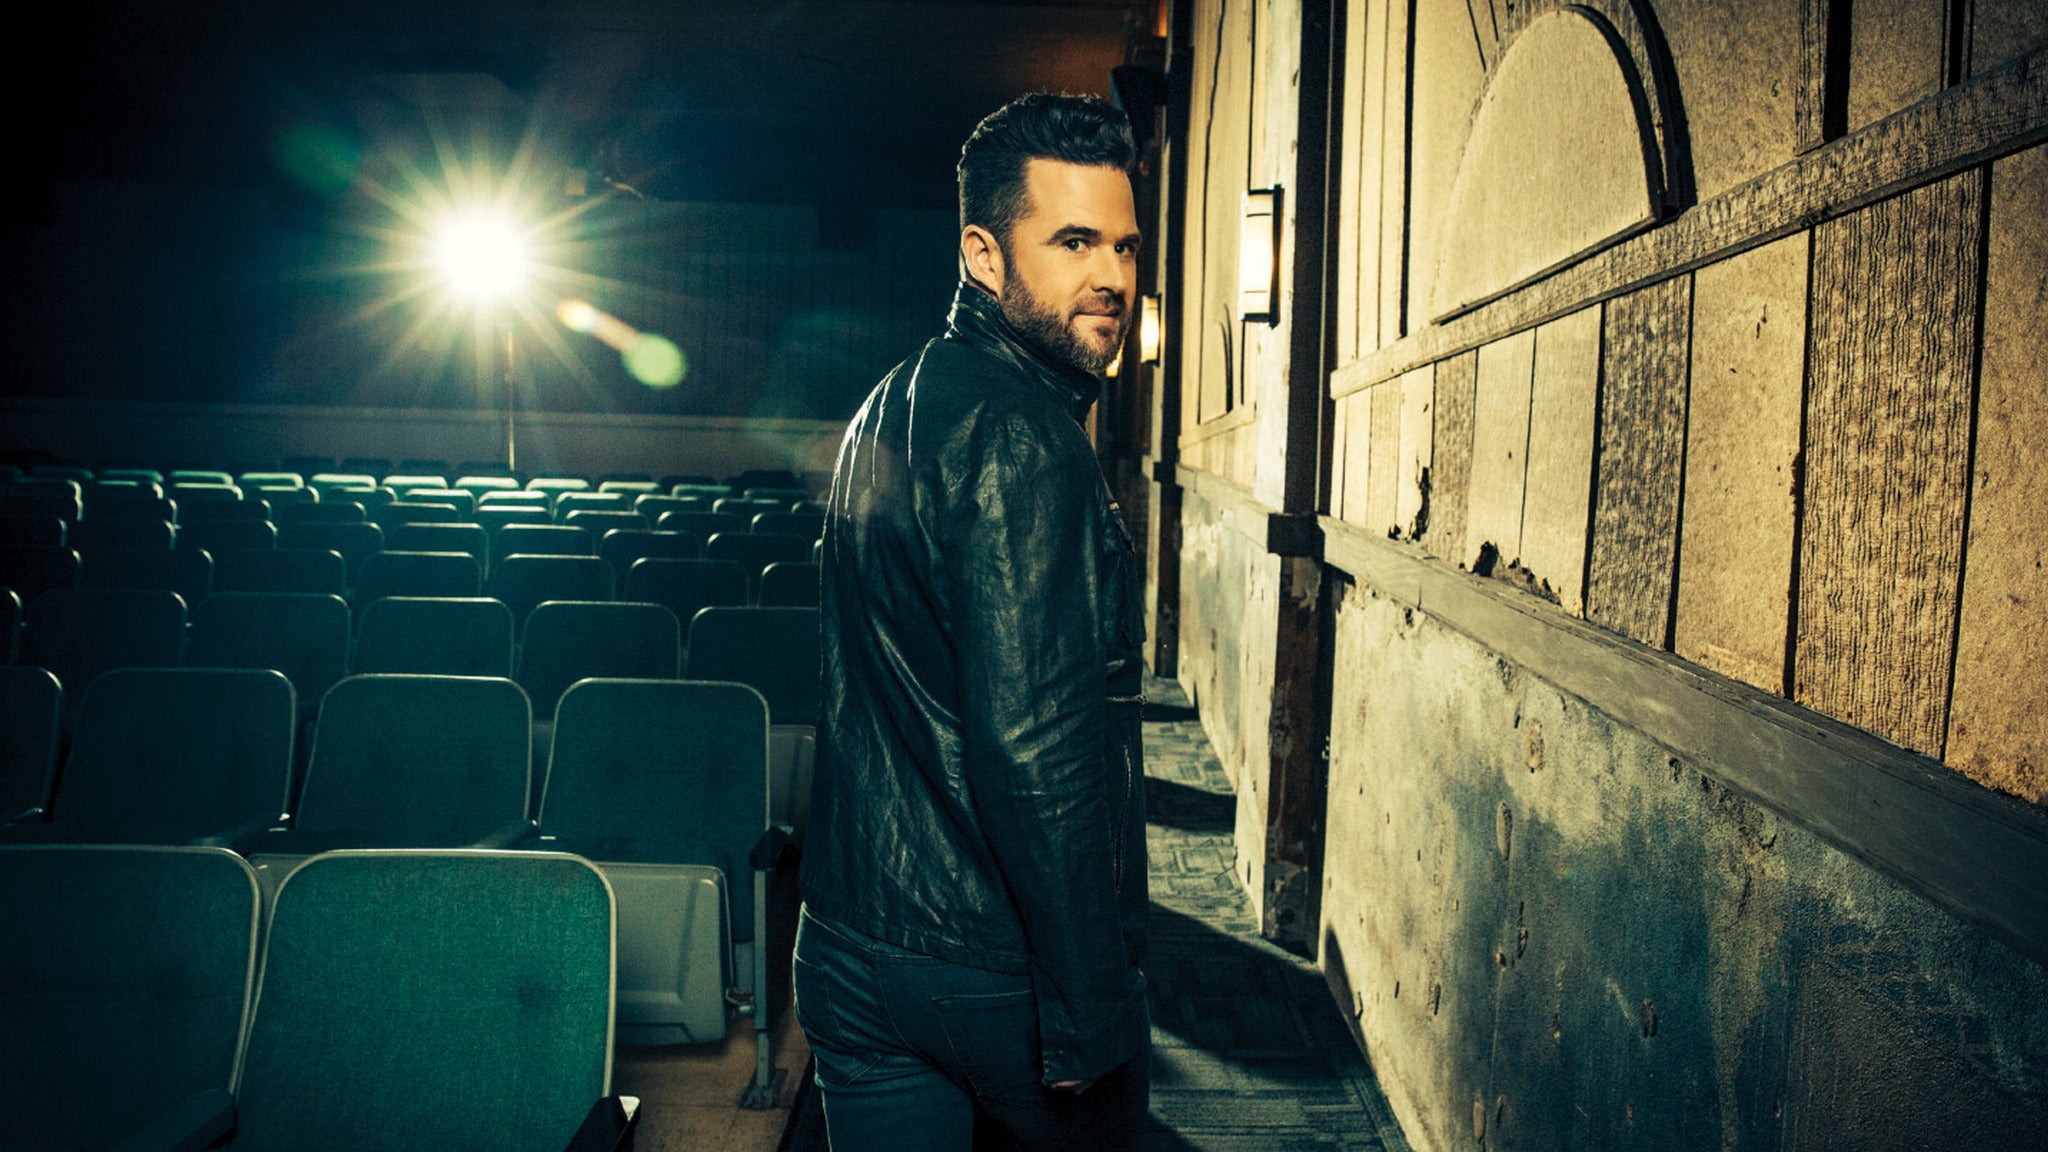 SORRY, THIS EVENT IS NO LONGER ACTIVE<br>David Nail at Wildwood Smokehouse and Saloon - Iowa City, IA 52240